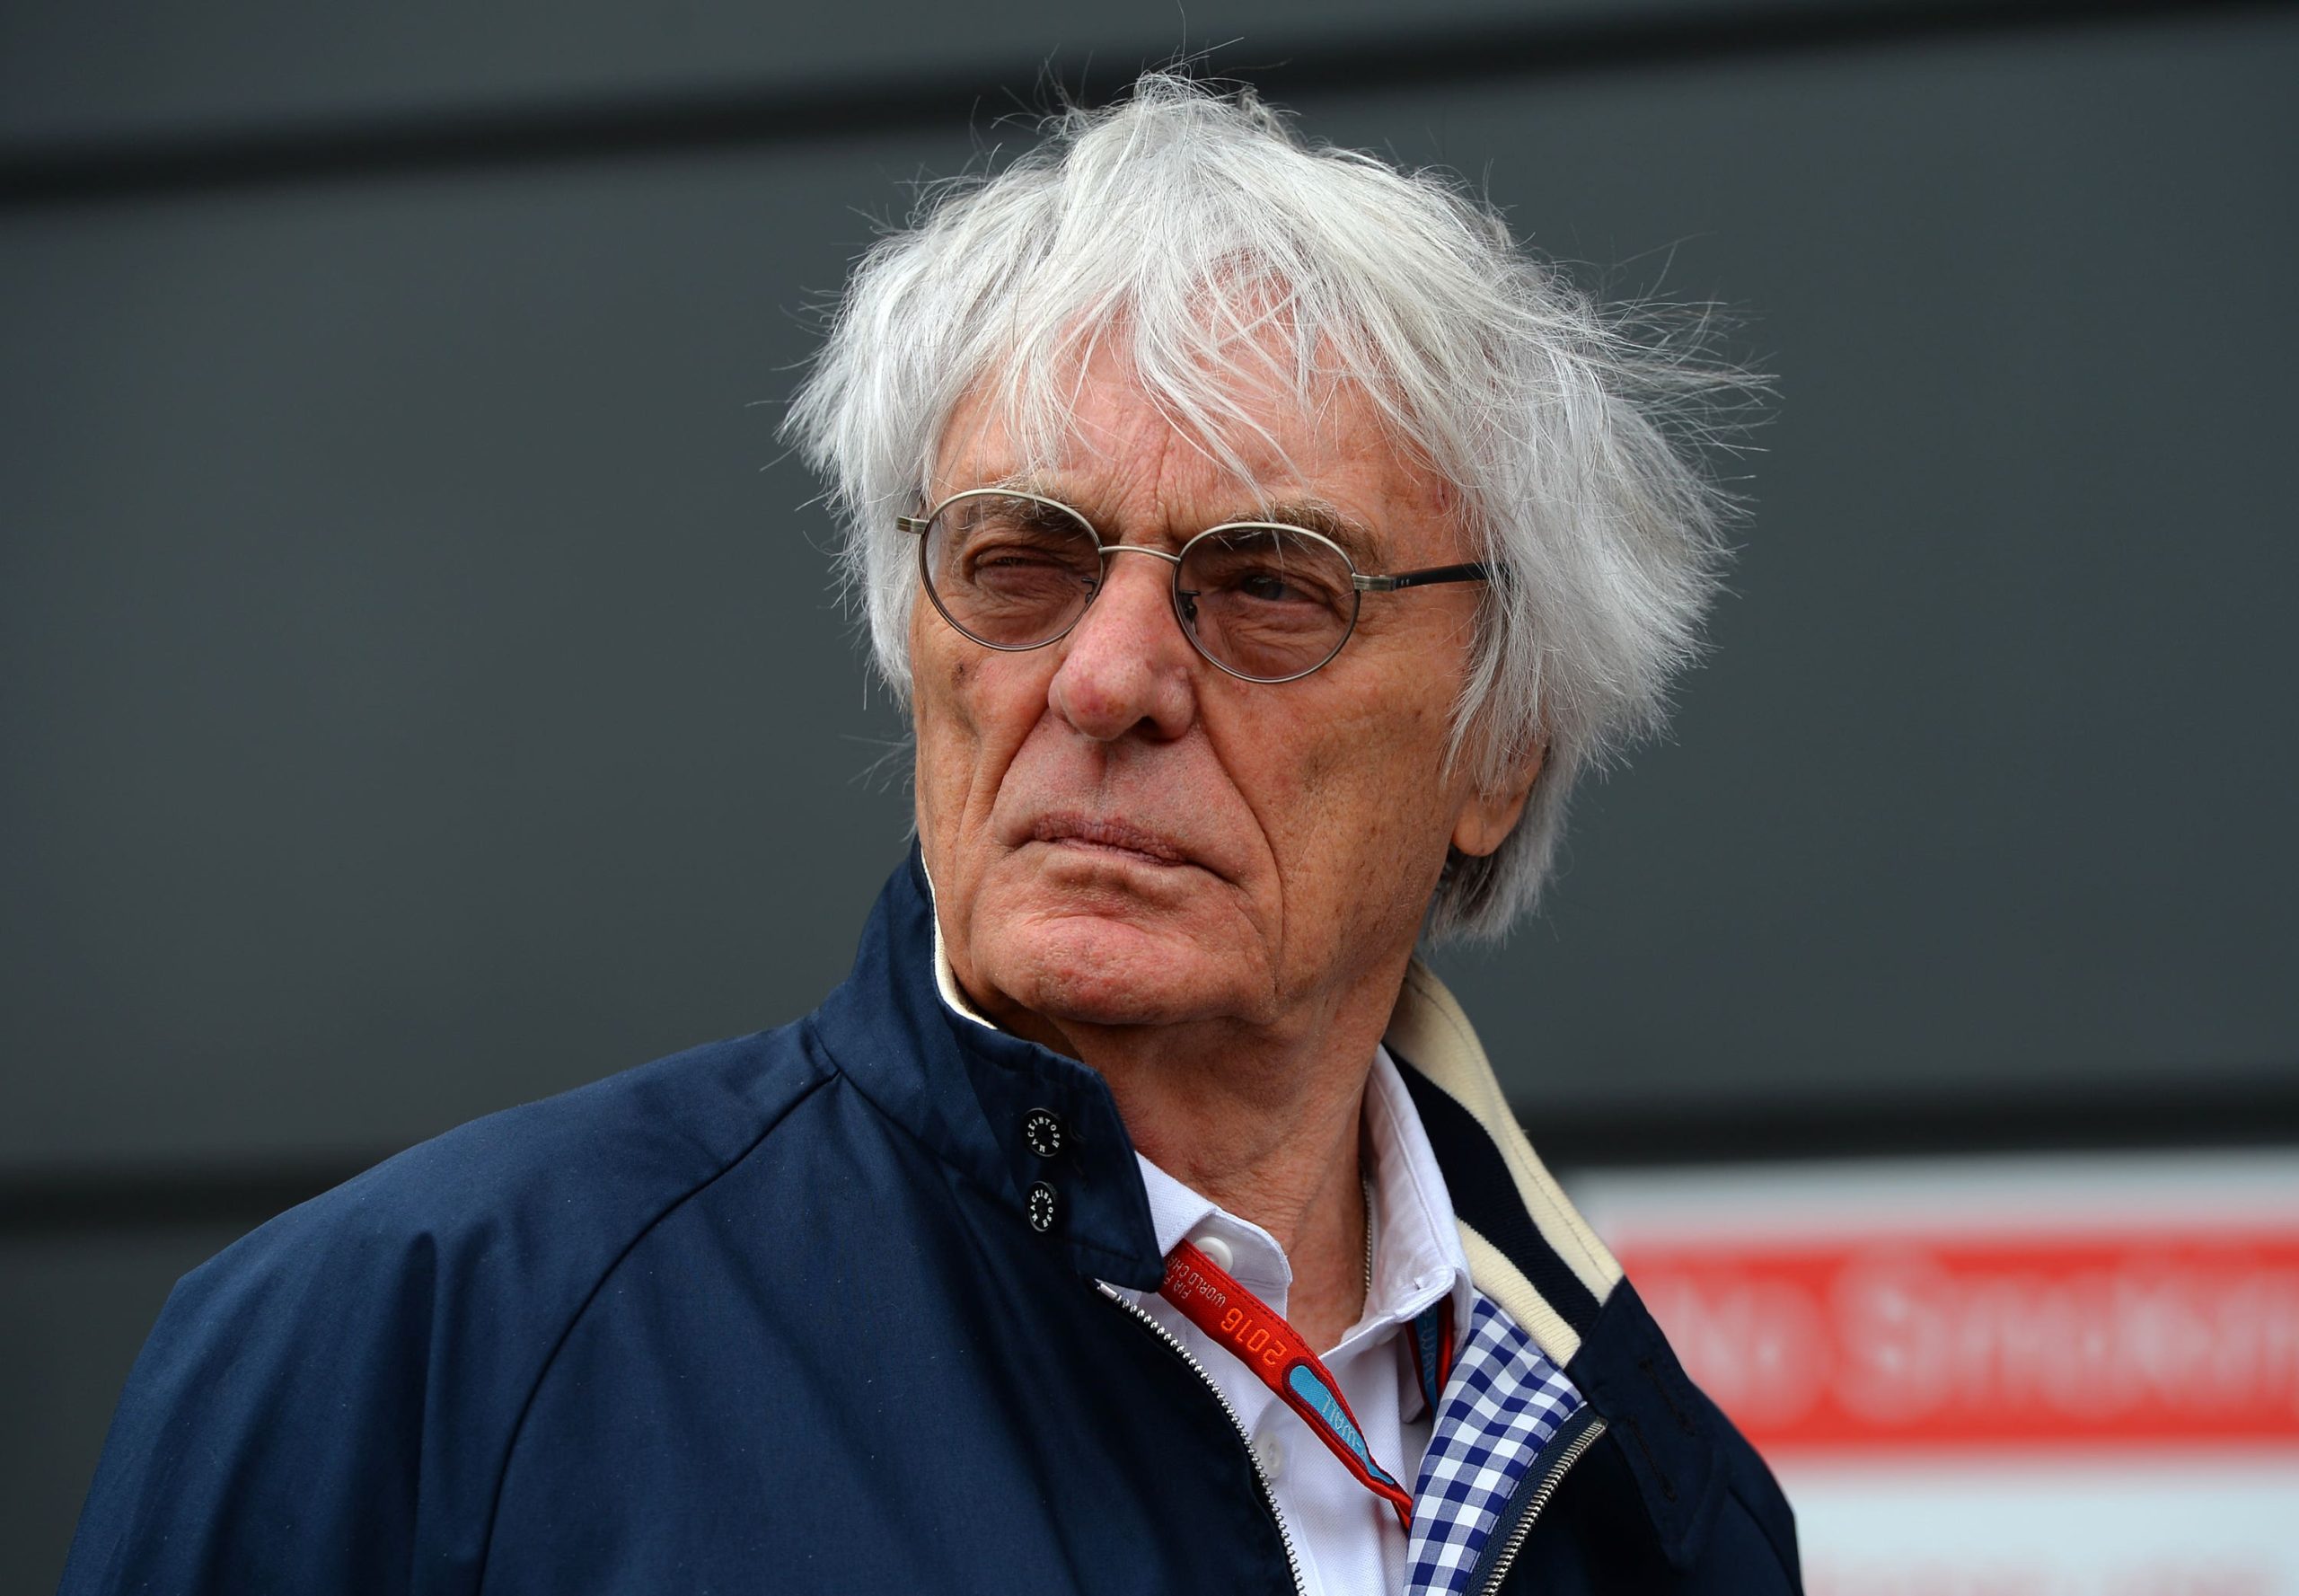 WTF! Bernie Ecclestone says he would ‘take a bullet for Putin’